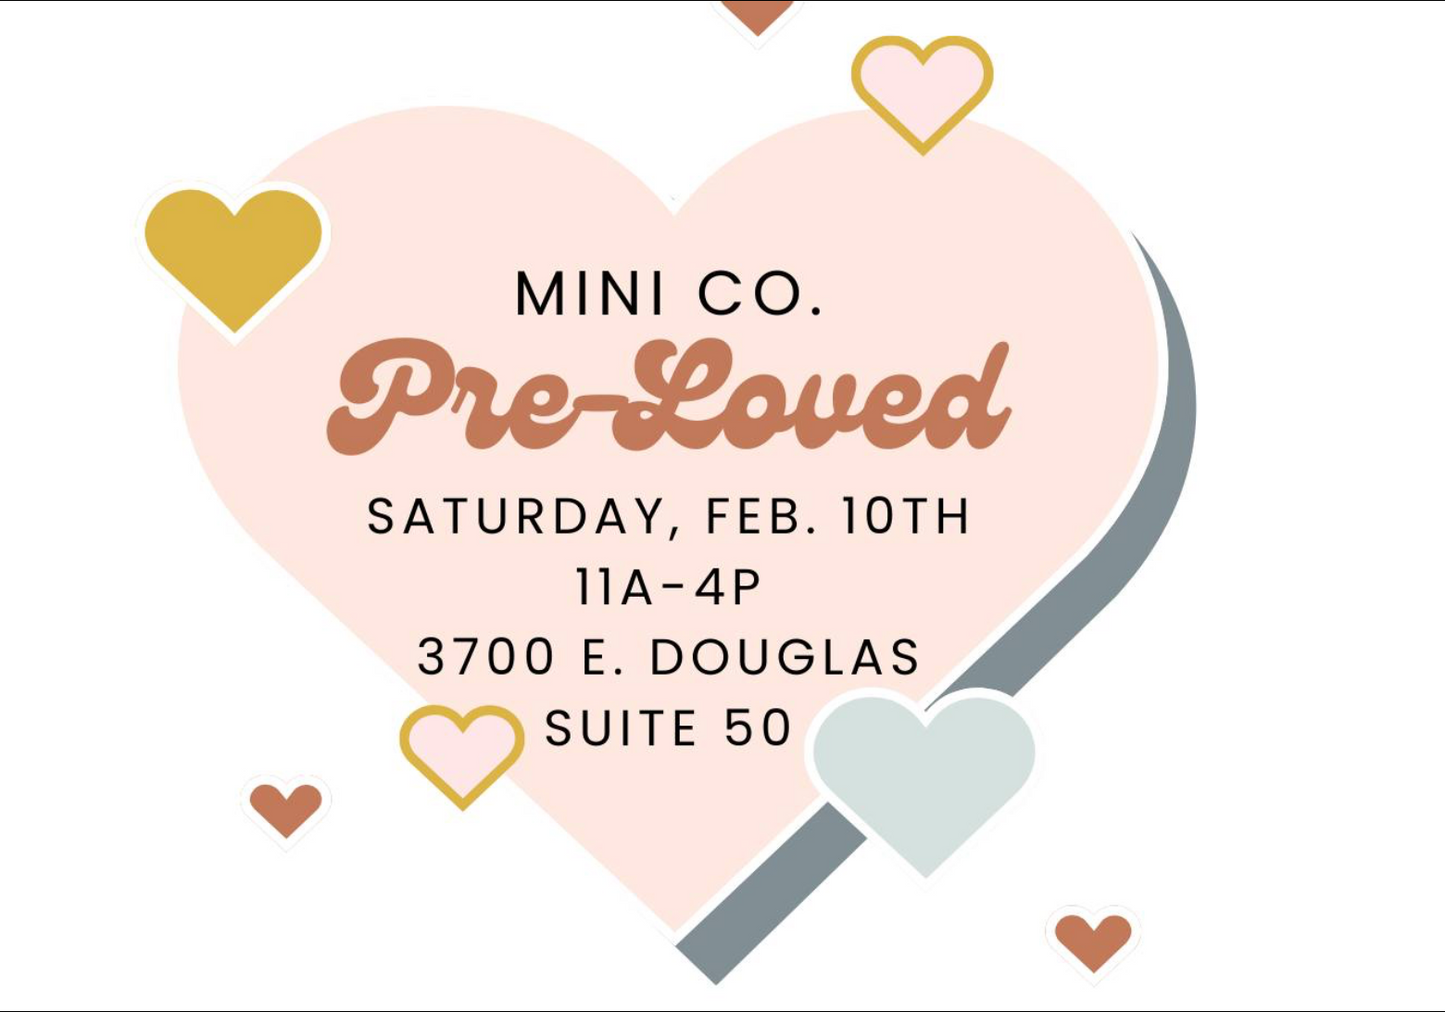 Mini Co. Pre-loved shopping event